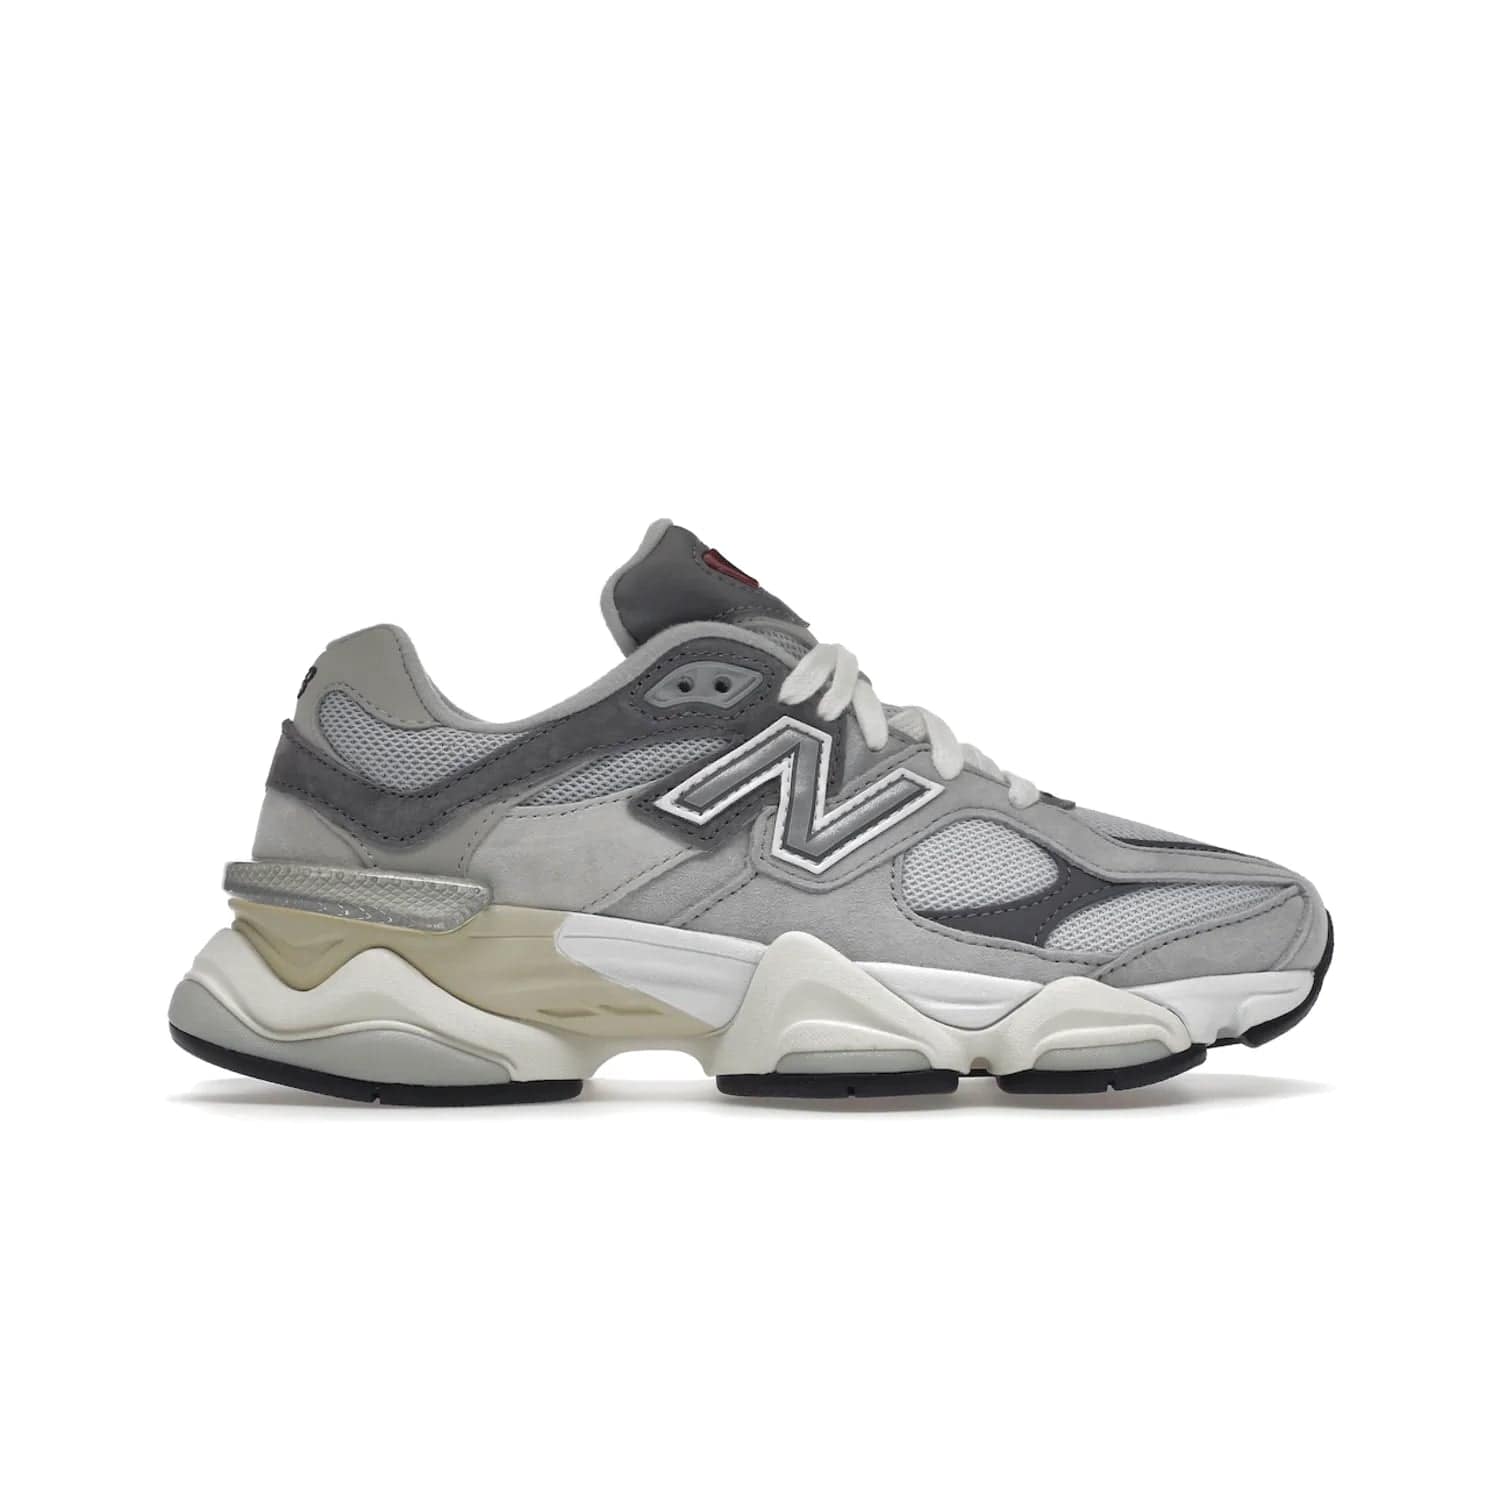 New Balance 9060 Rain Cloud Grey - Image 1 - Only at www.BallersClubKickz.com - New Balance 9060 Rain Cloud Grey is an early 2000s design with grey and off-white tones. Pigskin suede, mesh, and silver accents. "N" emblem and dual-density midsole on diamond outsole. ABZORB technology cushioning. September 2nd release for $150.